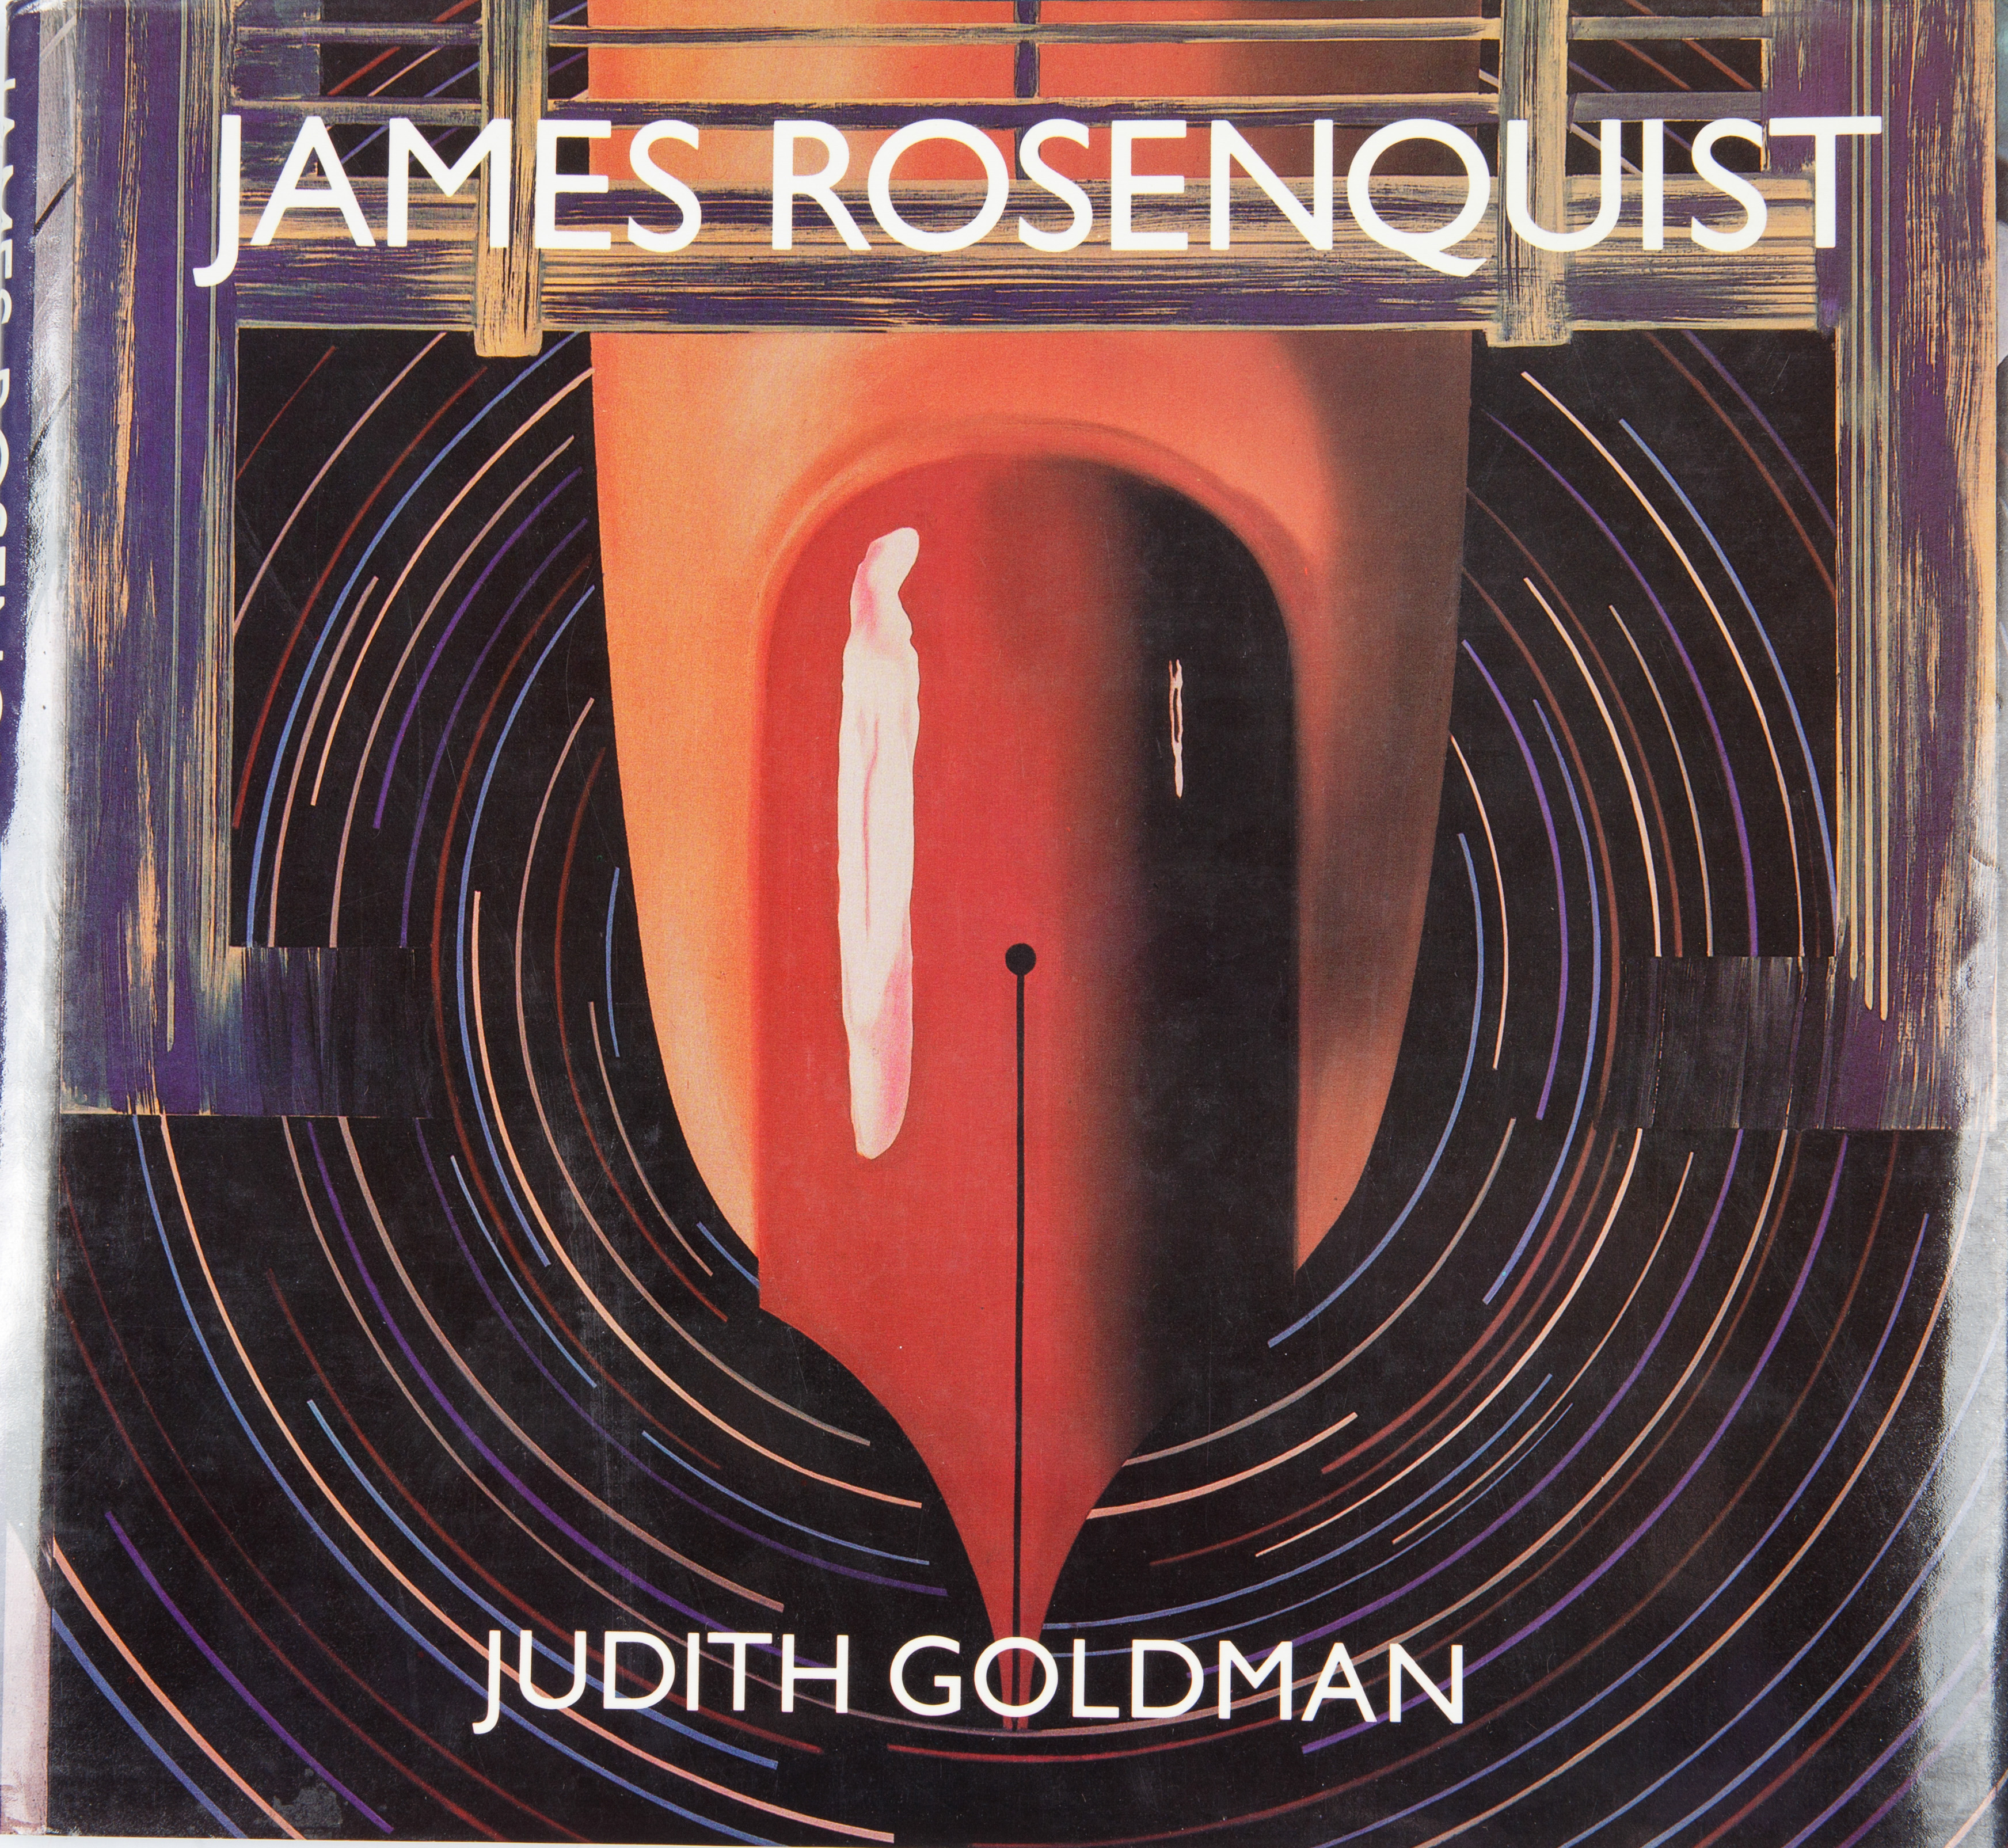 A SIGNED BOOK BY JAMES ROSENQUIST (AMERICAN 1933-2017)